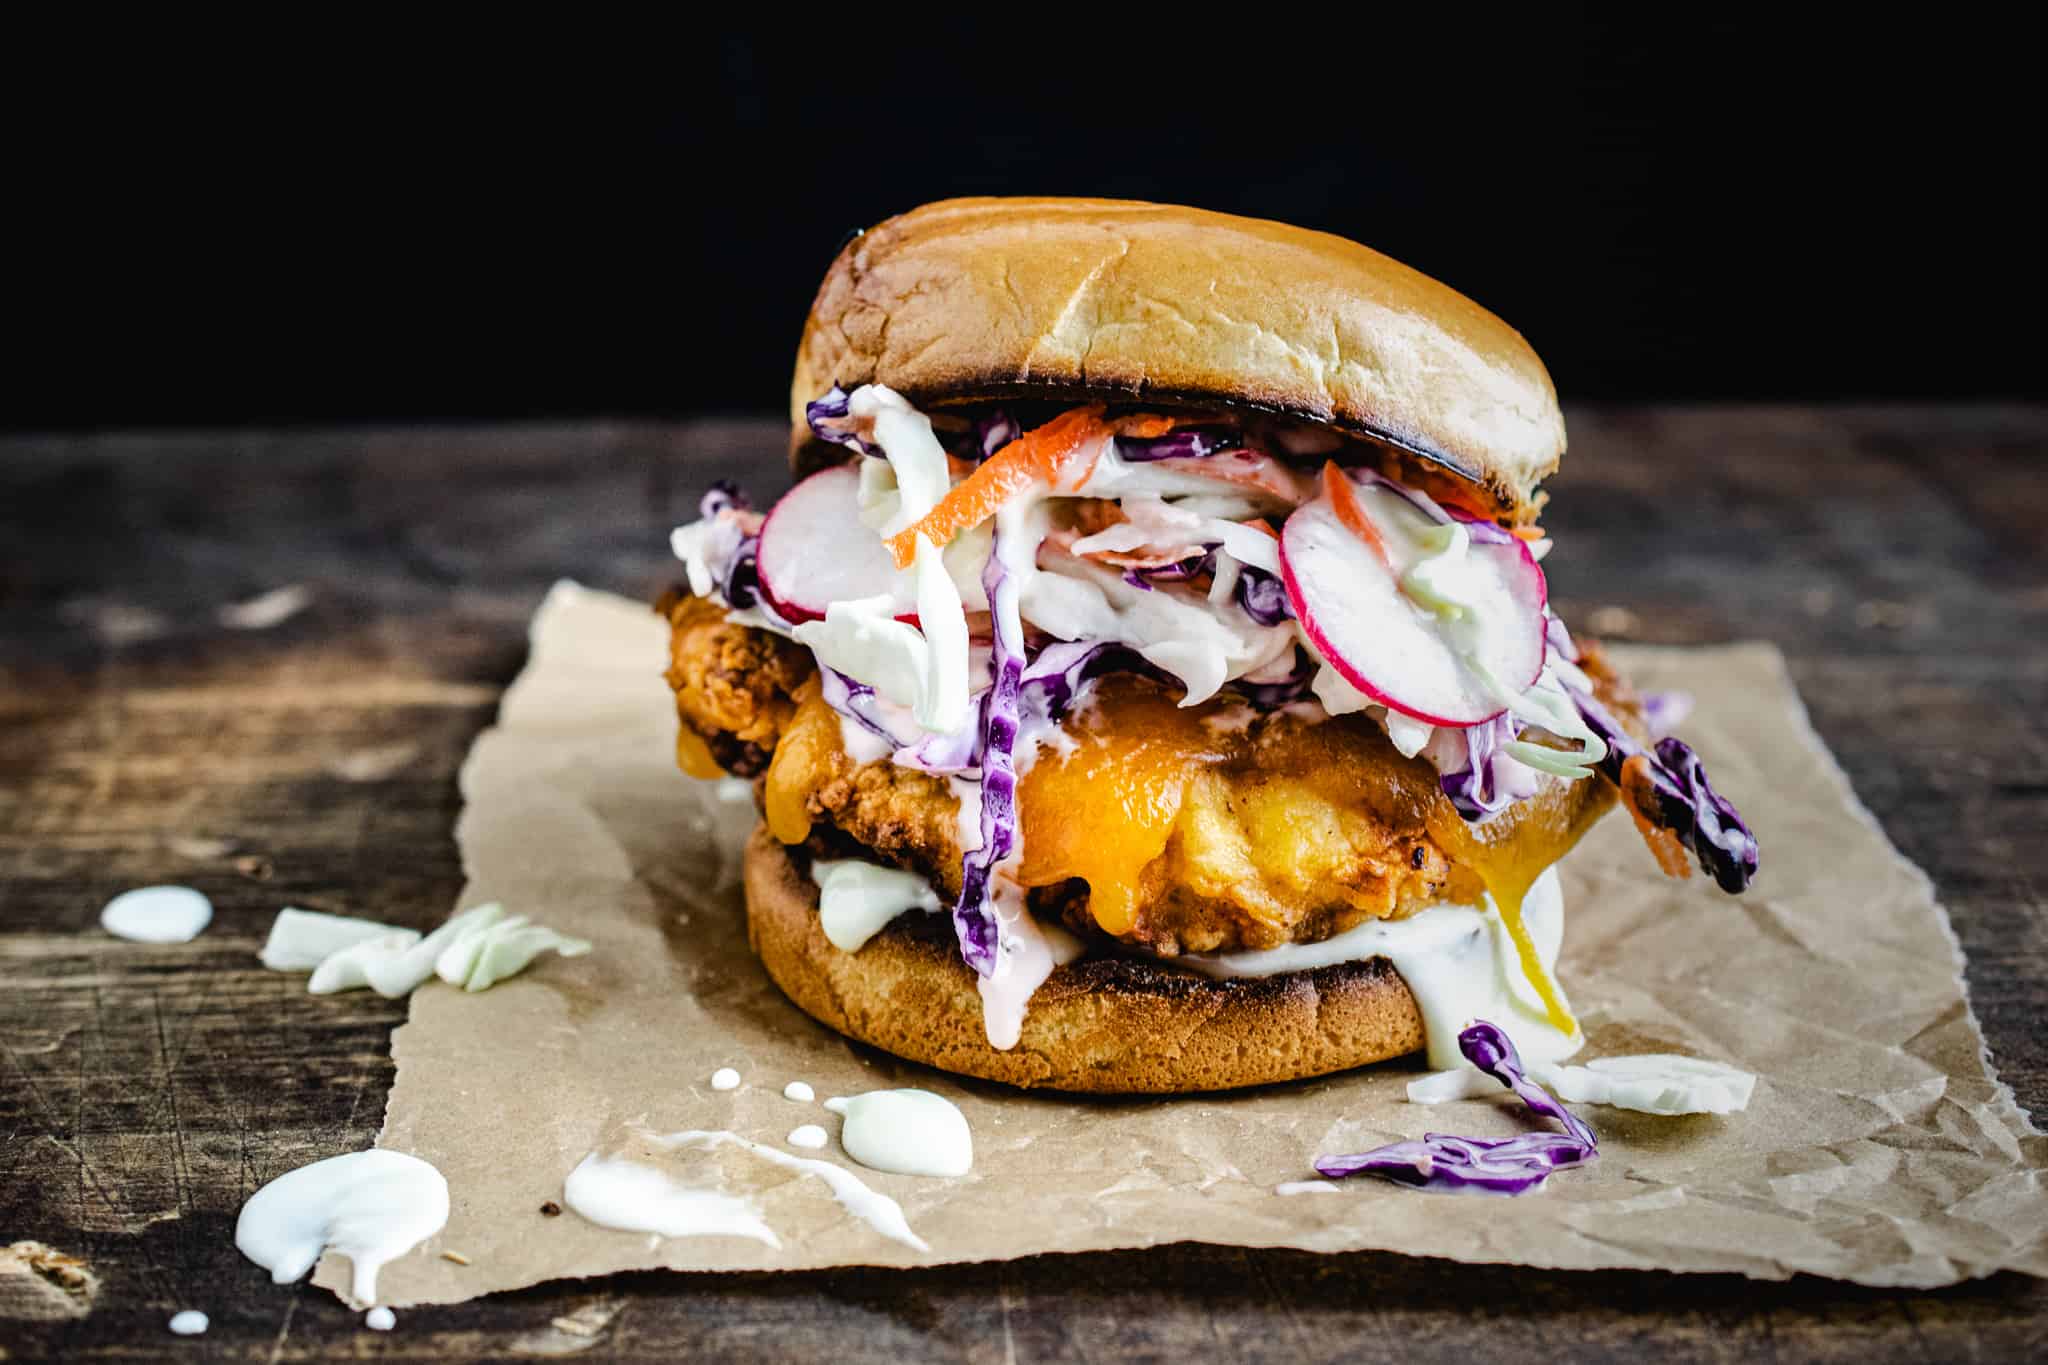 buttermilk fried chicken sandwich topped with cheddar and slaw, on brioche bun on wood surface with black background and messy drips scattered around